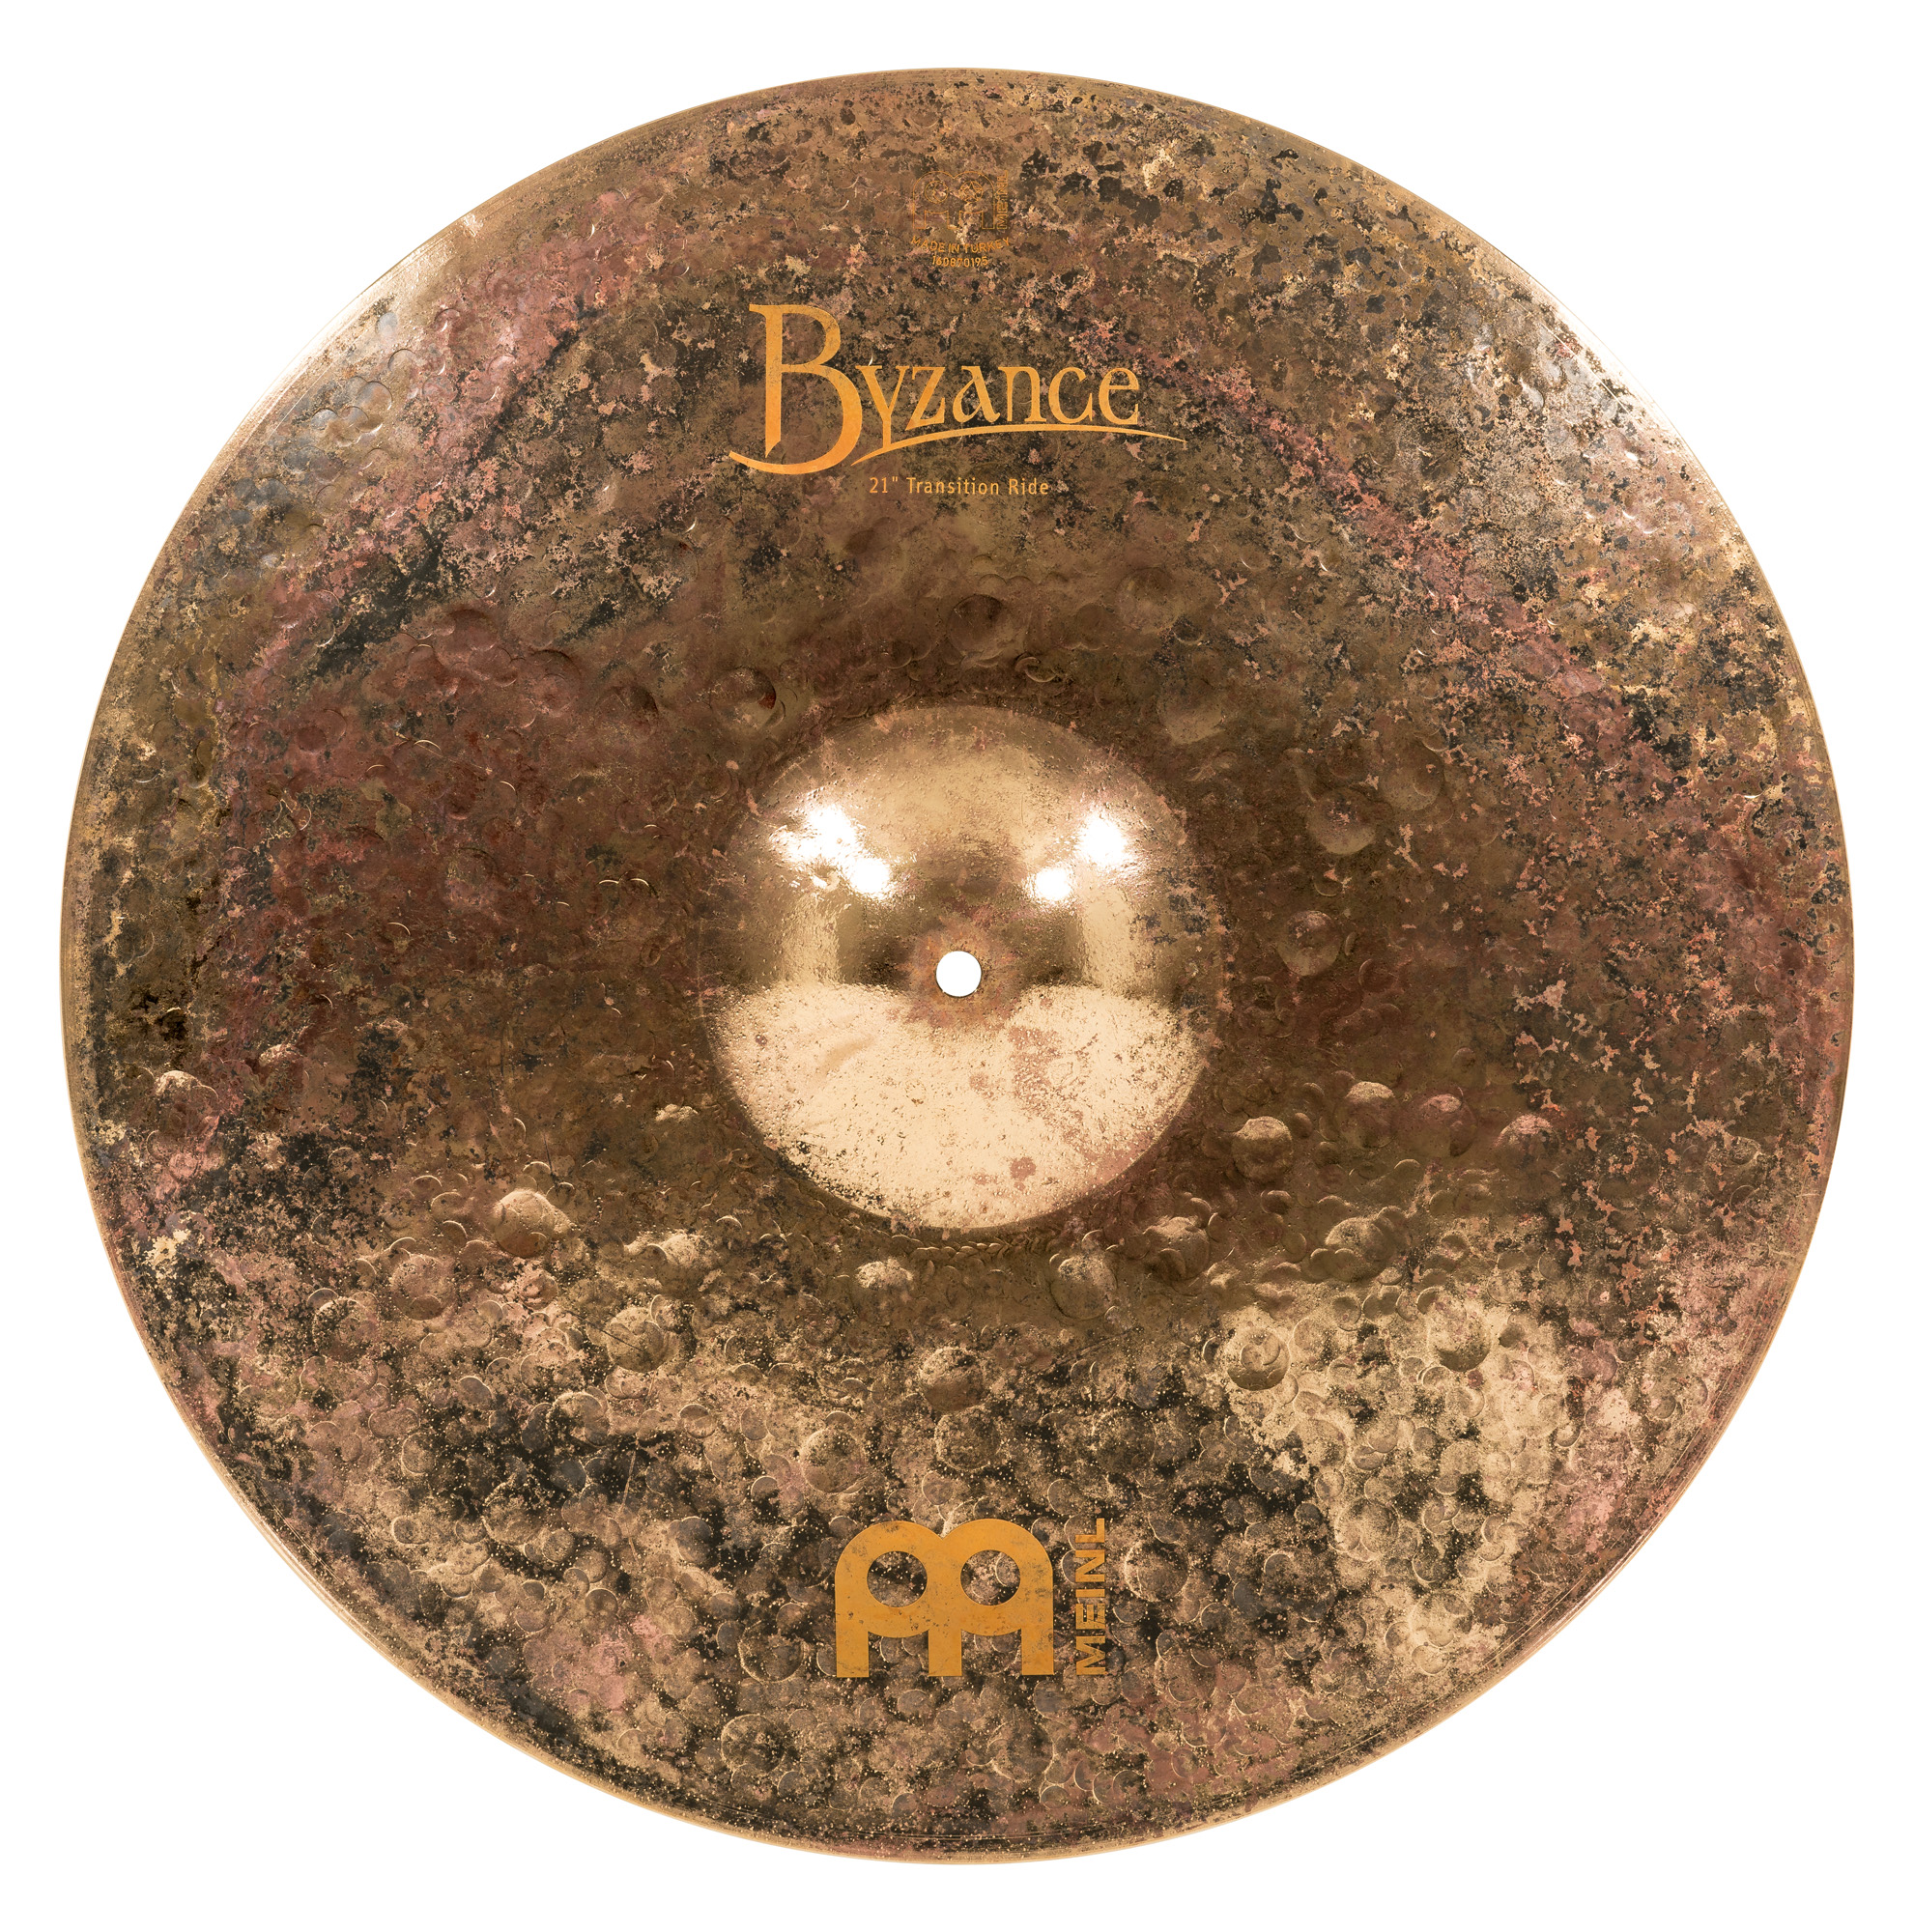 Meinl Byzance Ed Dual Pack 14 16 18 21 - Cymbals set - Variation 4